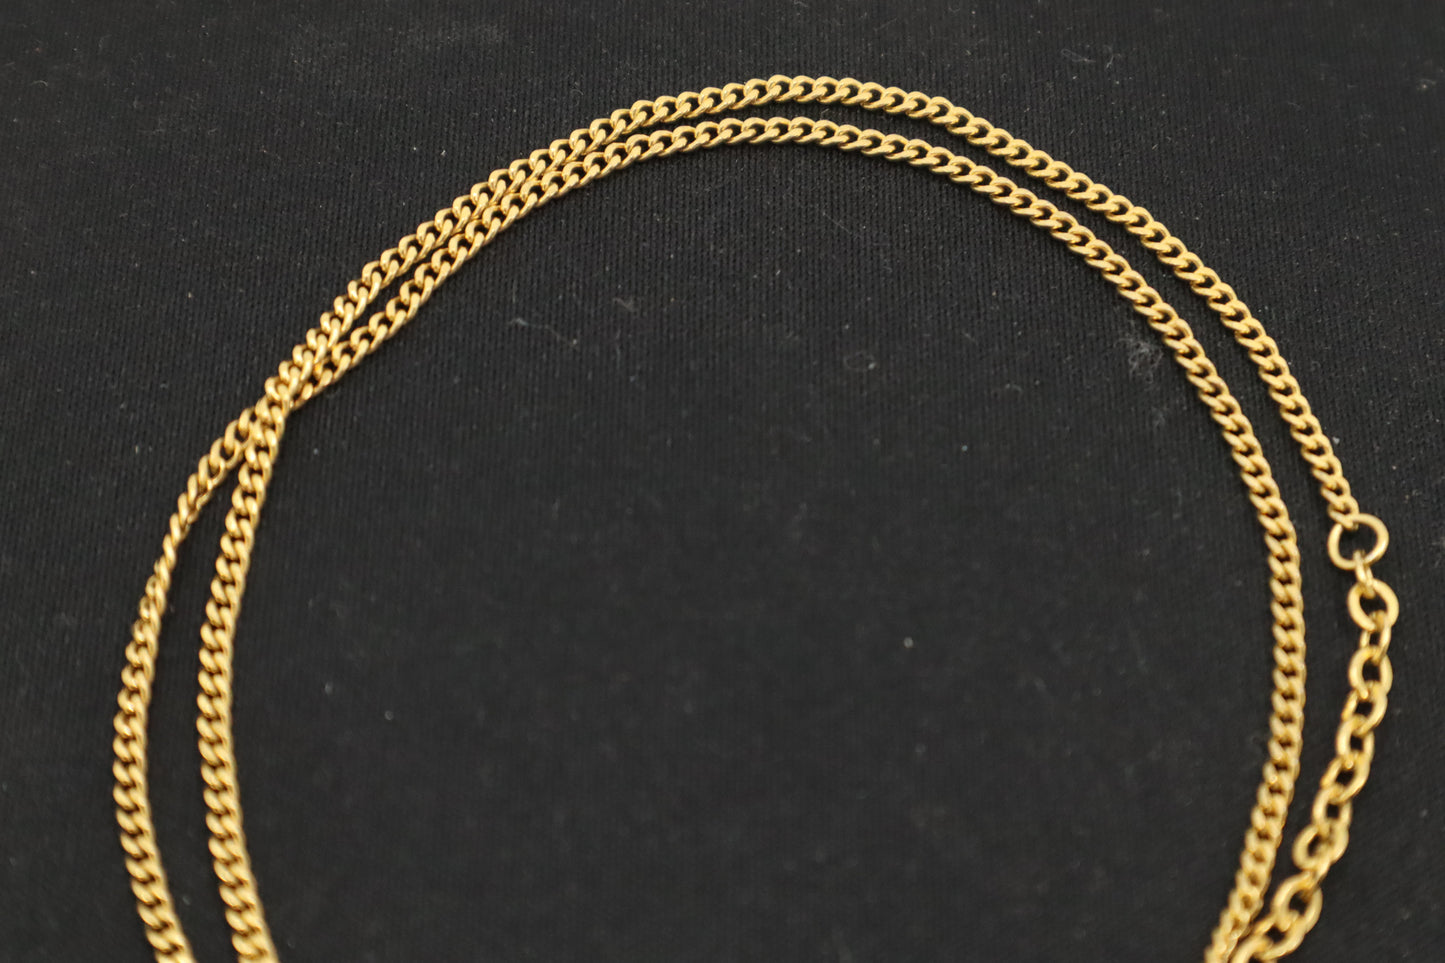 Dior Necklace in Gold-Tone